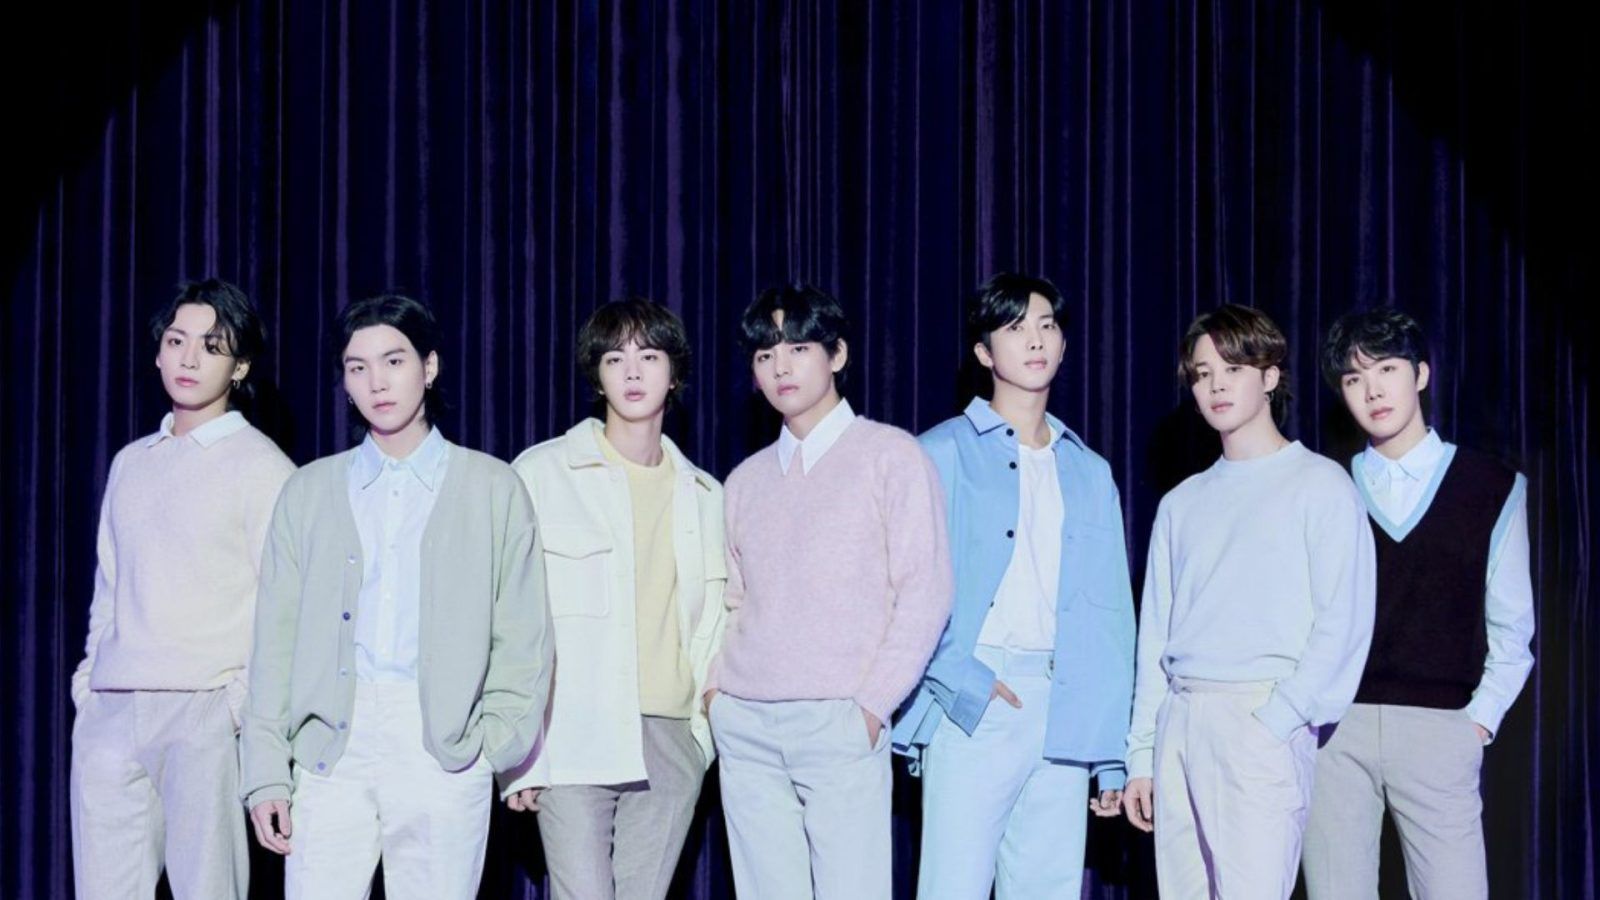 BTS sport eccentric fashion outfits worth Lakhs at Permission to